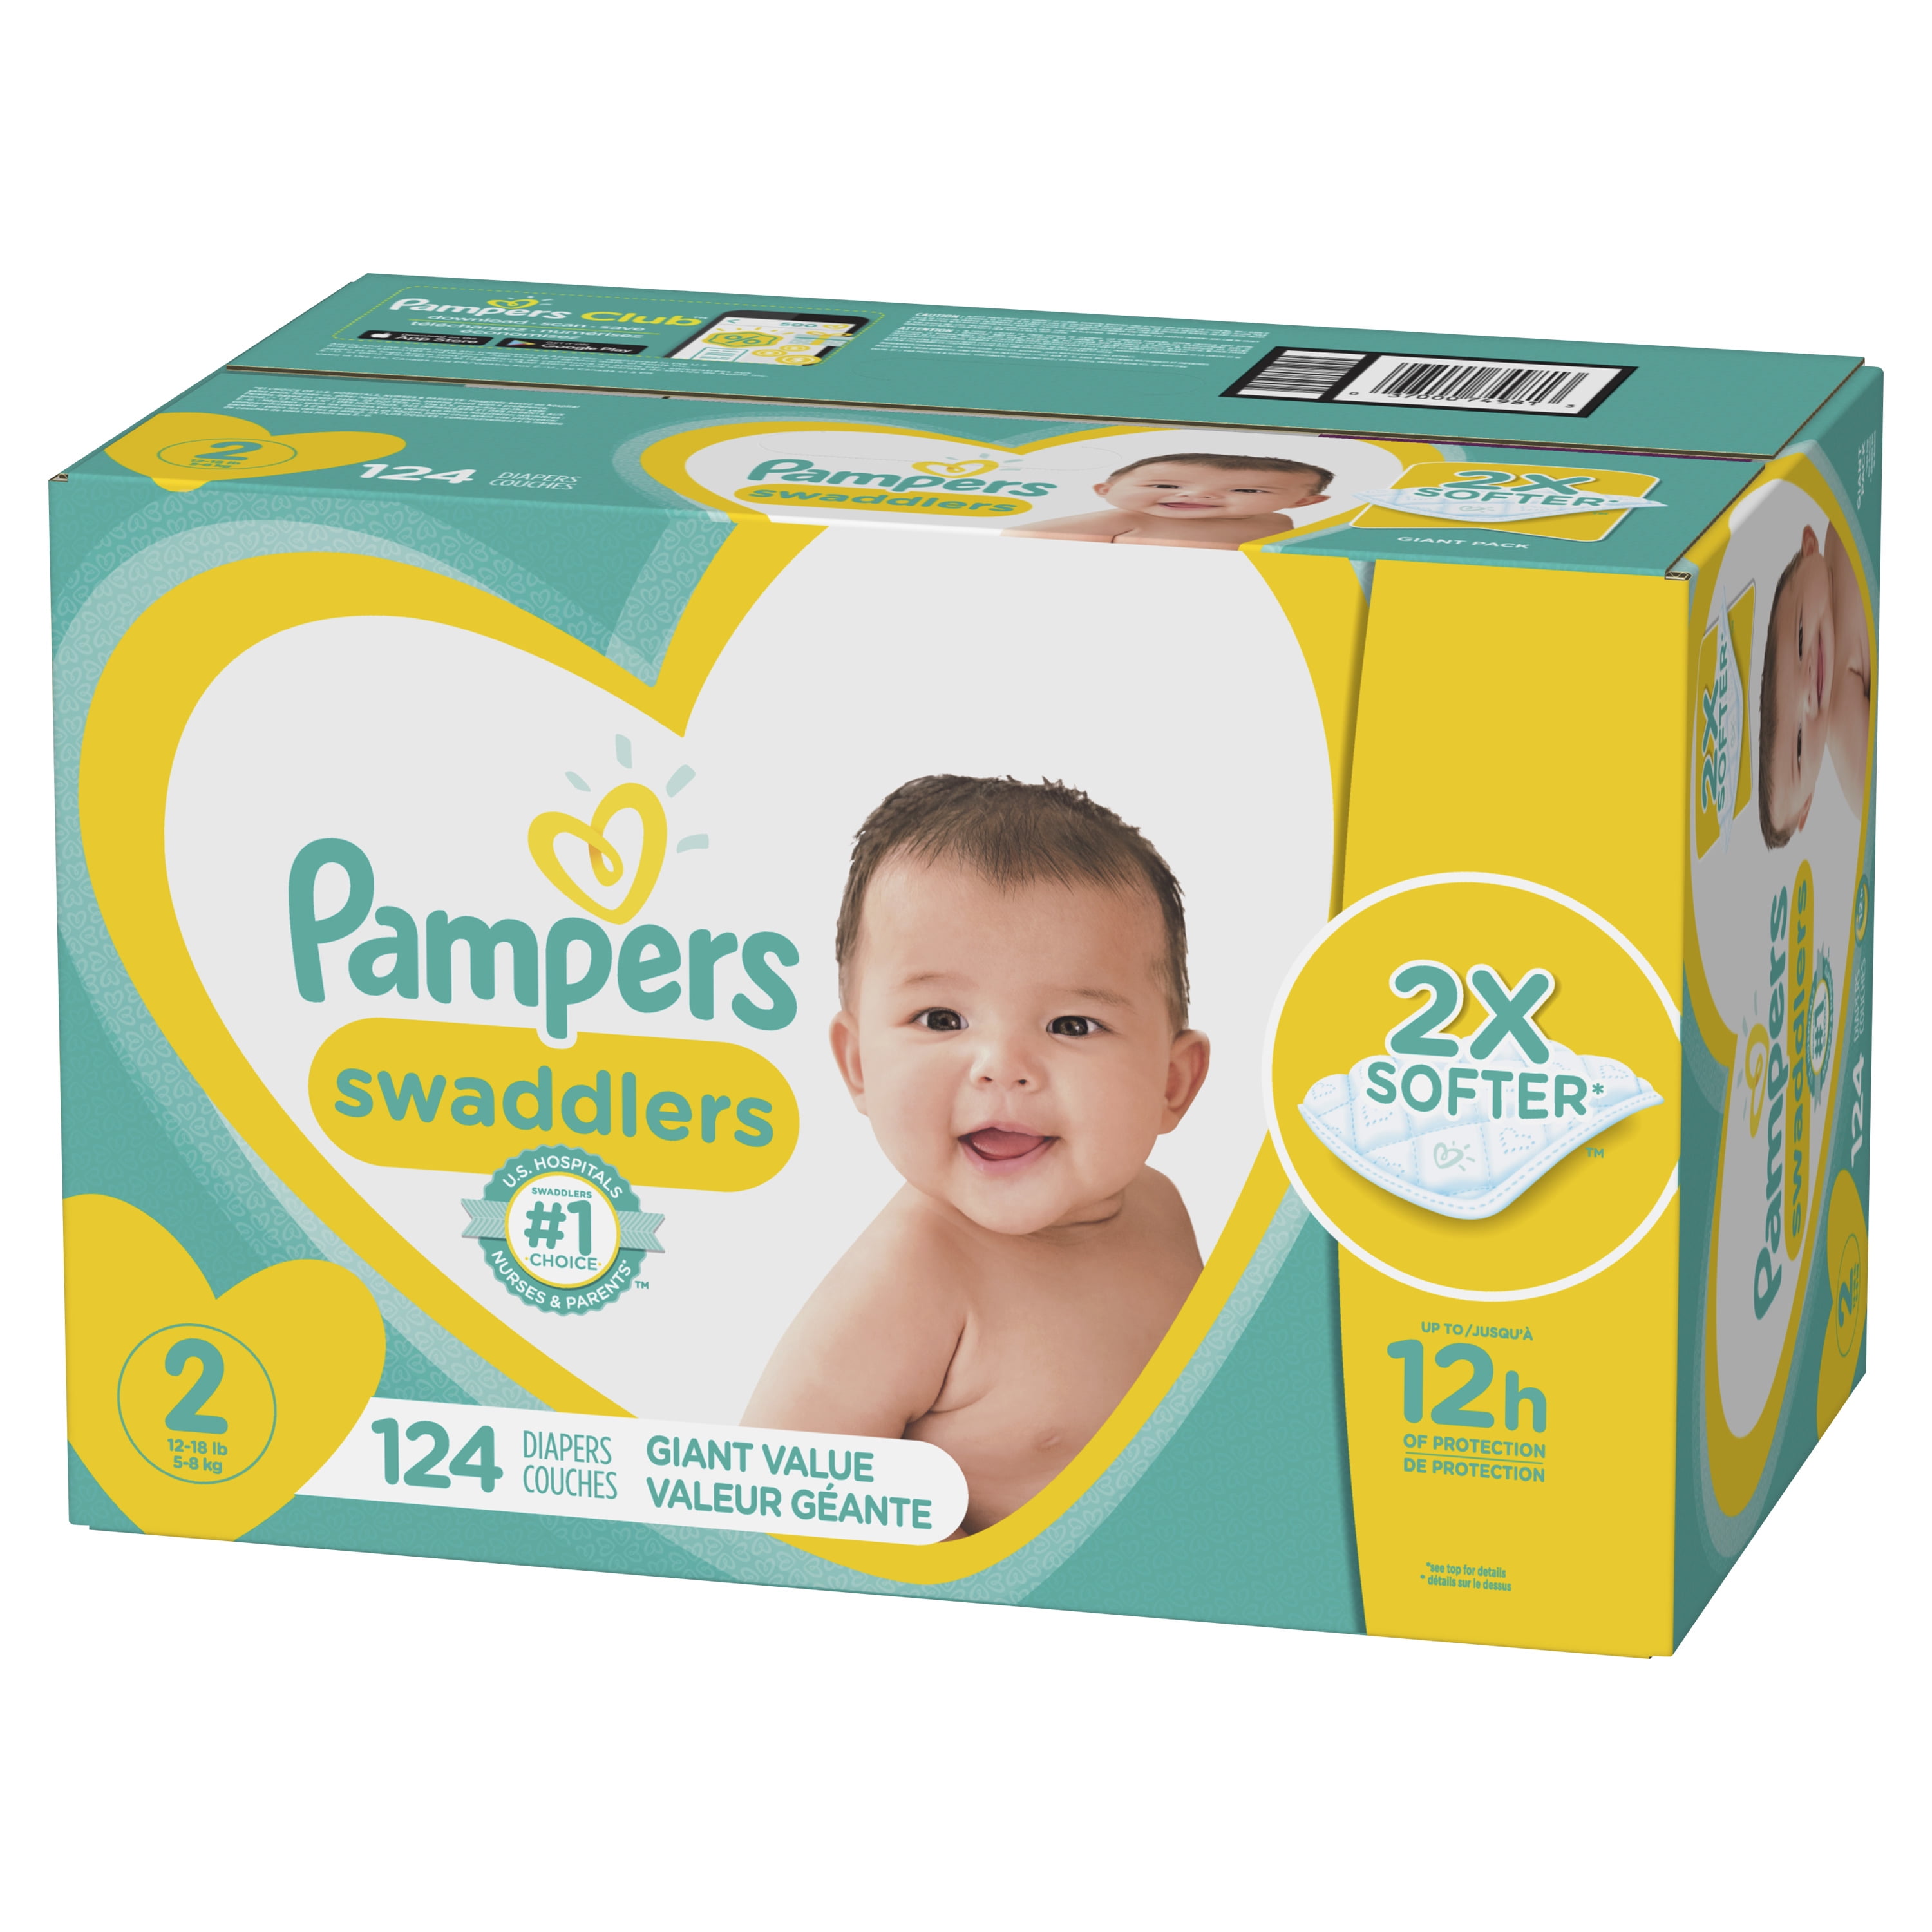 Giant Pampers Swaddlers Disposable Baby Diapers 124 Count Diapers Size 2 